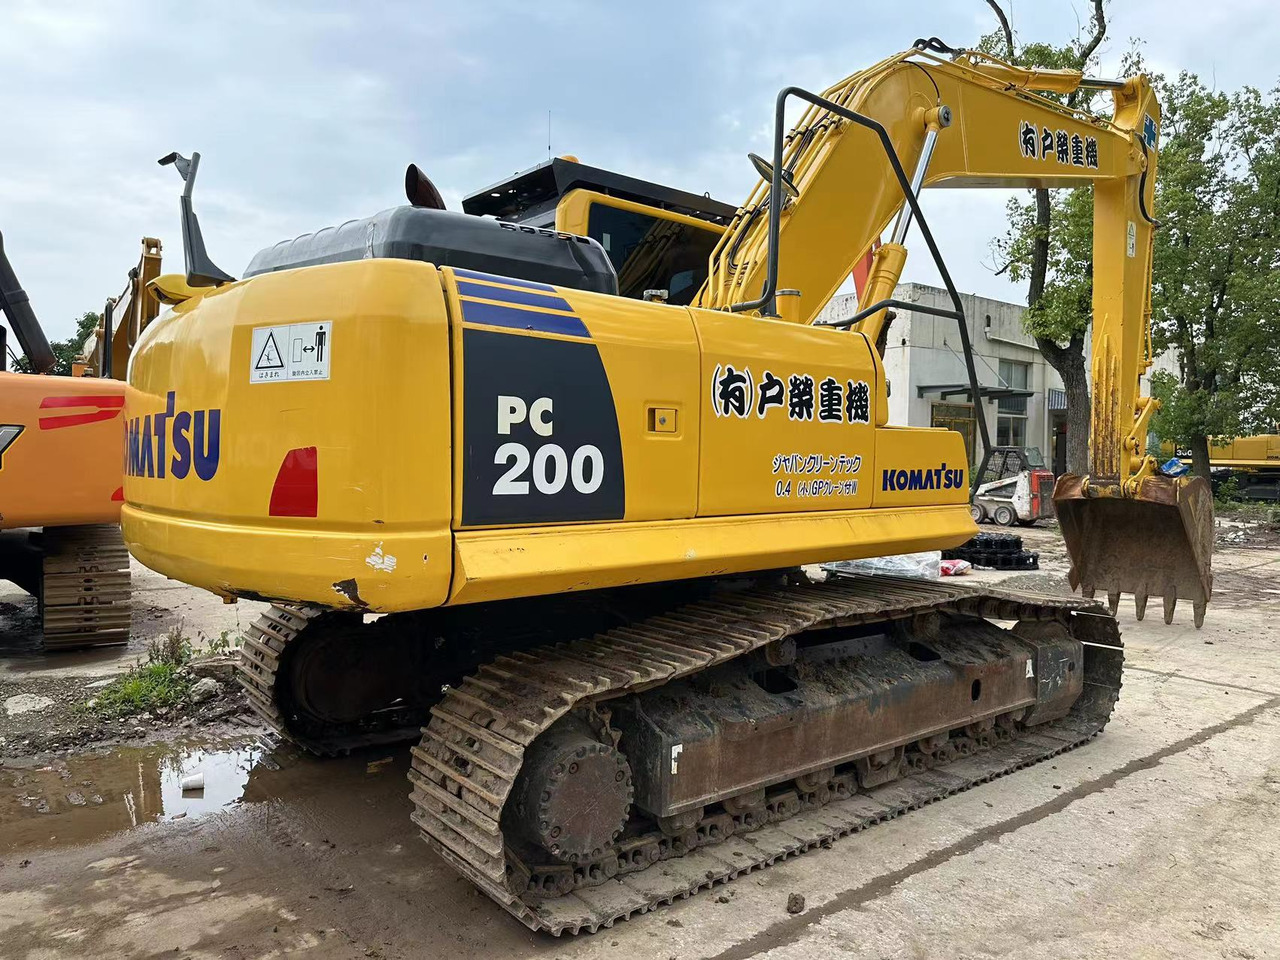 Kettenbagger High quality Good Performance KOMATSU PC200-8N1 with original design and strong power low working hours good condition on sale: das Bild 2